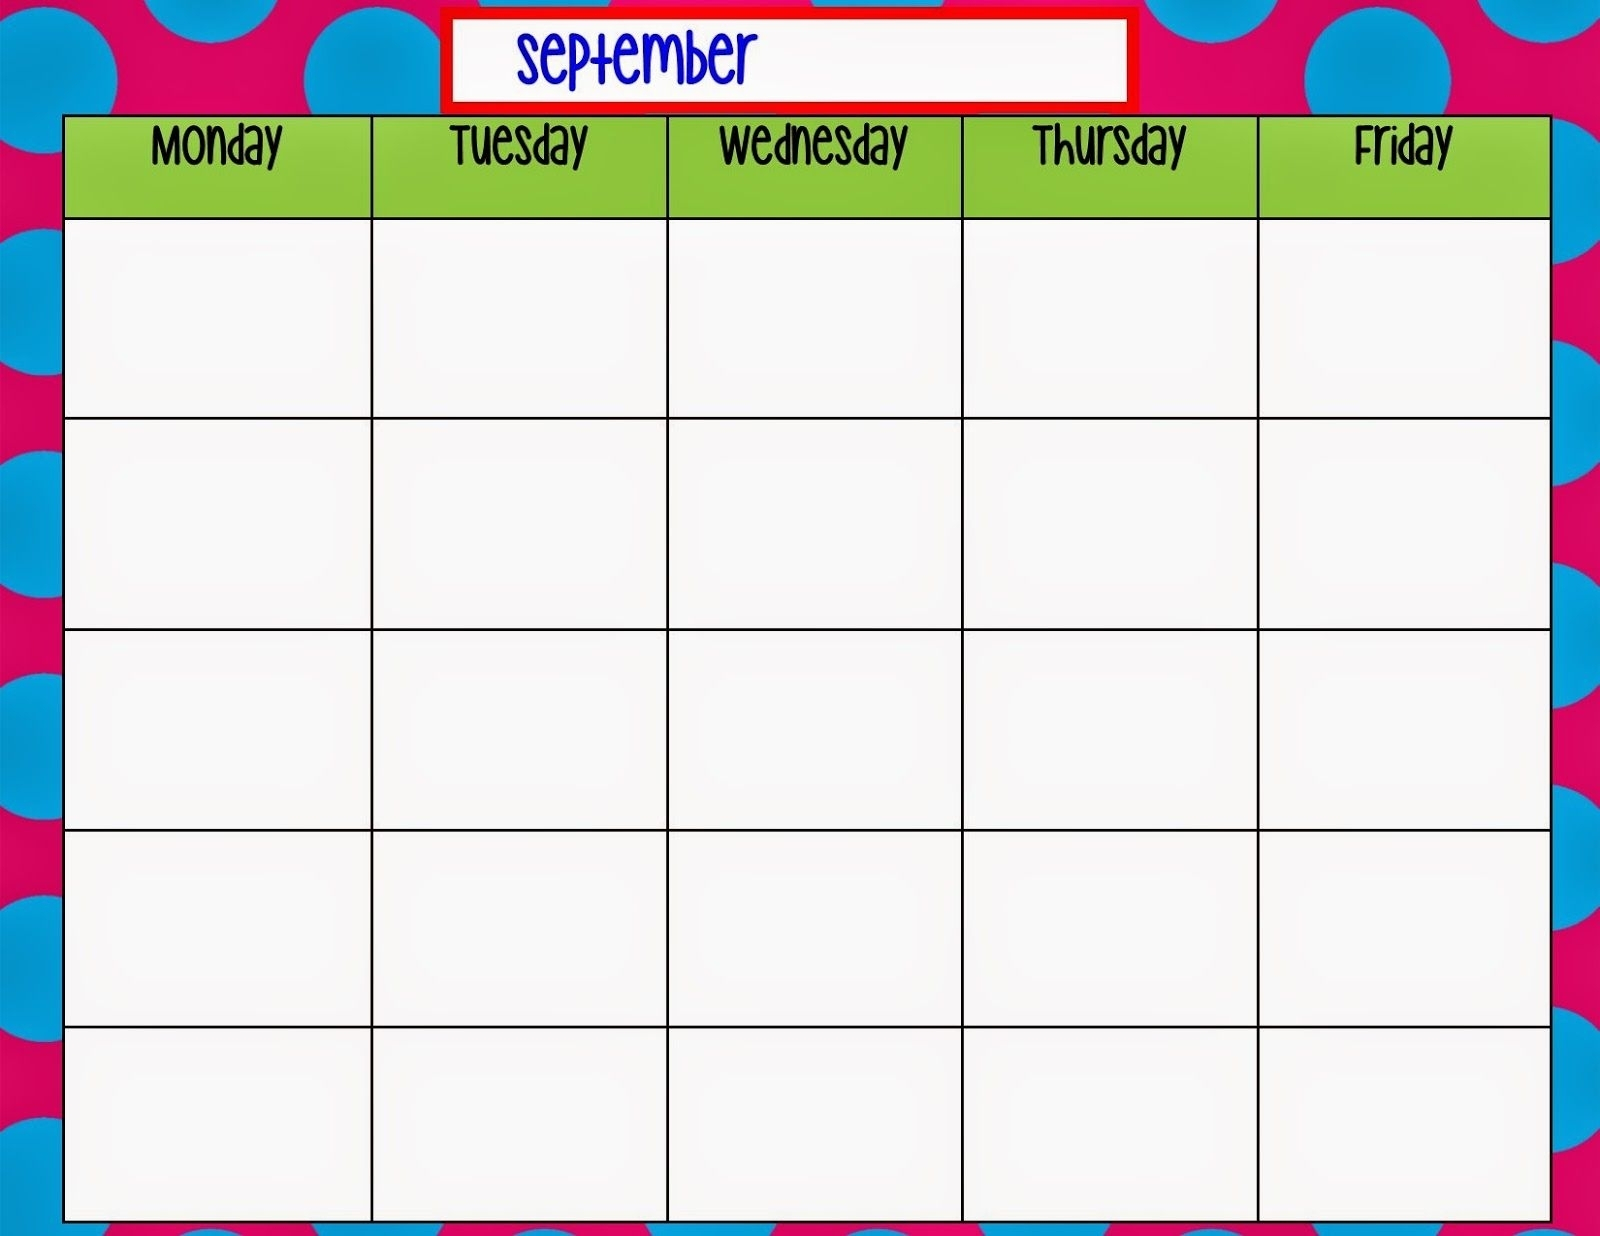 Printable Weekly Schedule Monday Through Friday  Calendar Inspiration pertaining to Plain Monday Through Friday Calendar